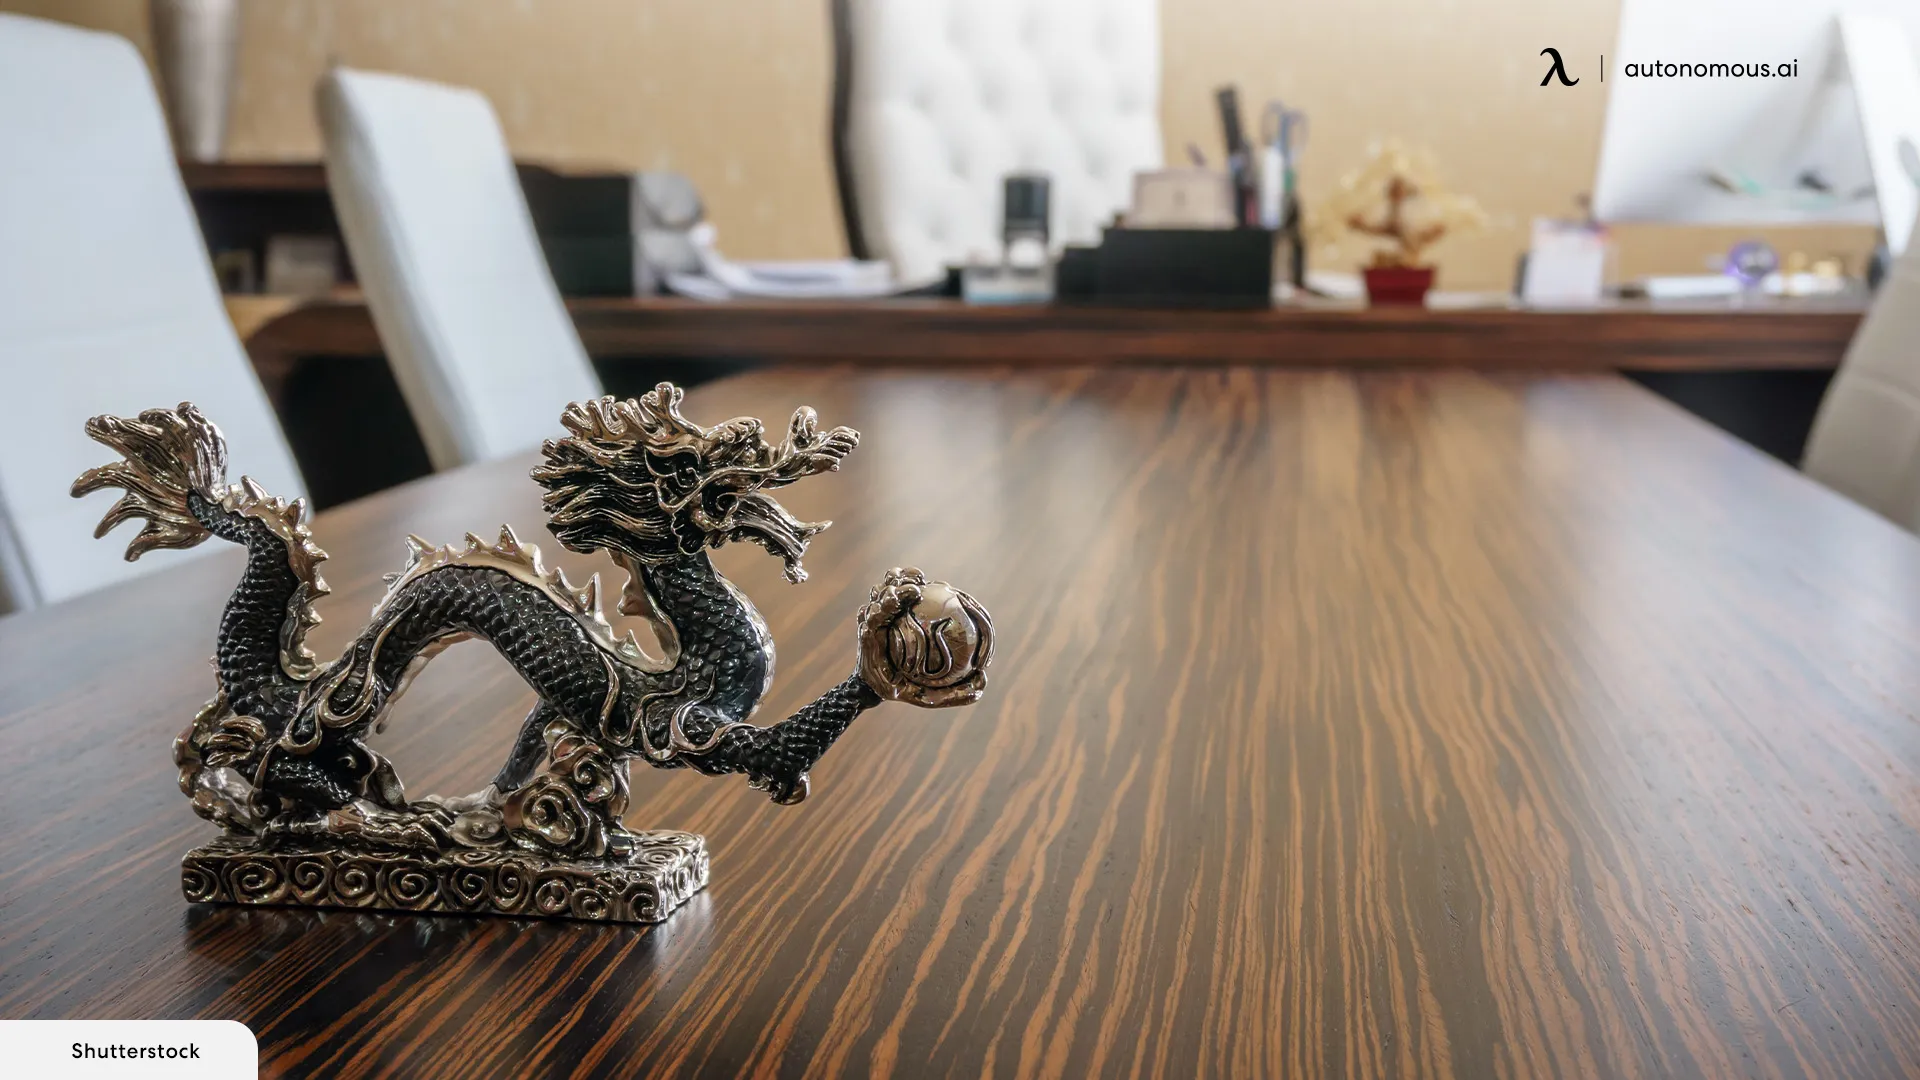 Dragon-Themed Desk Decorating Competition